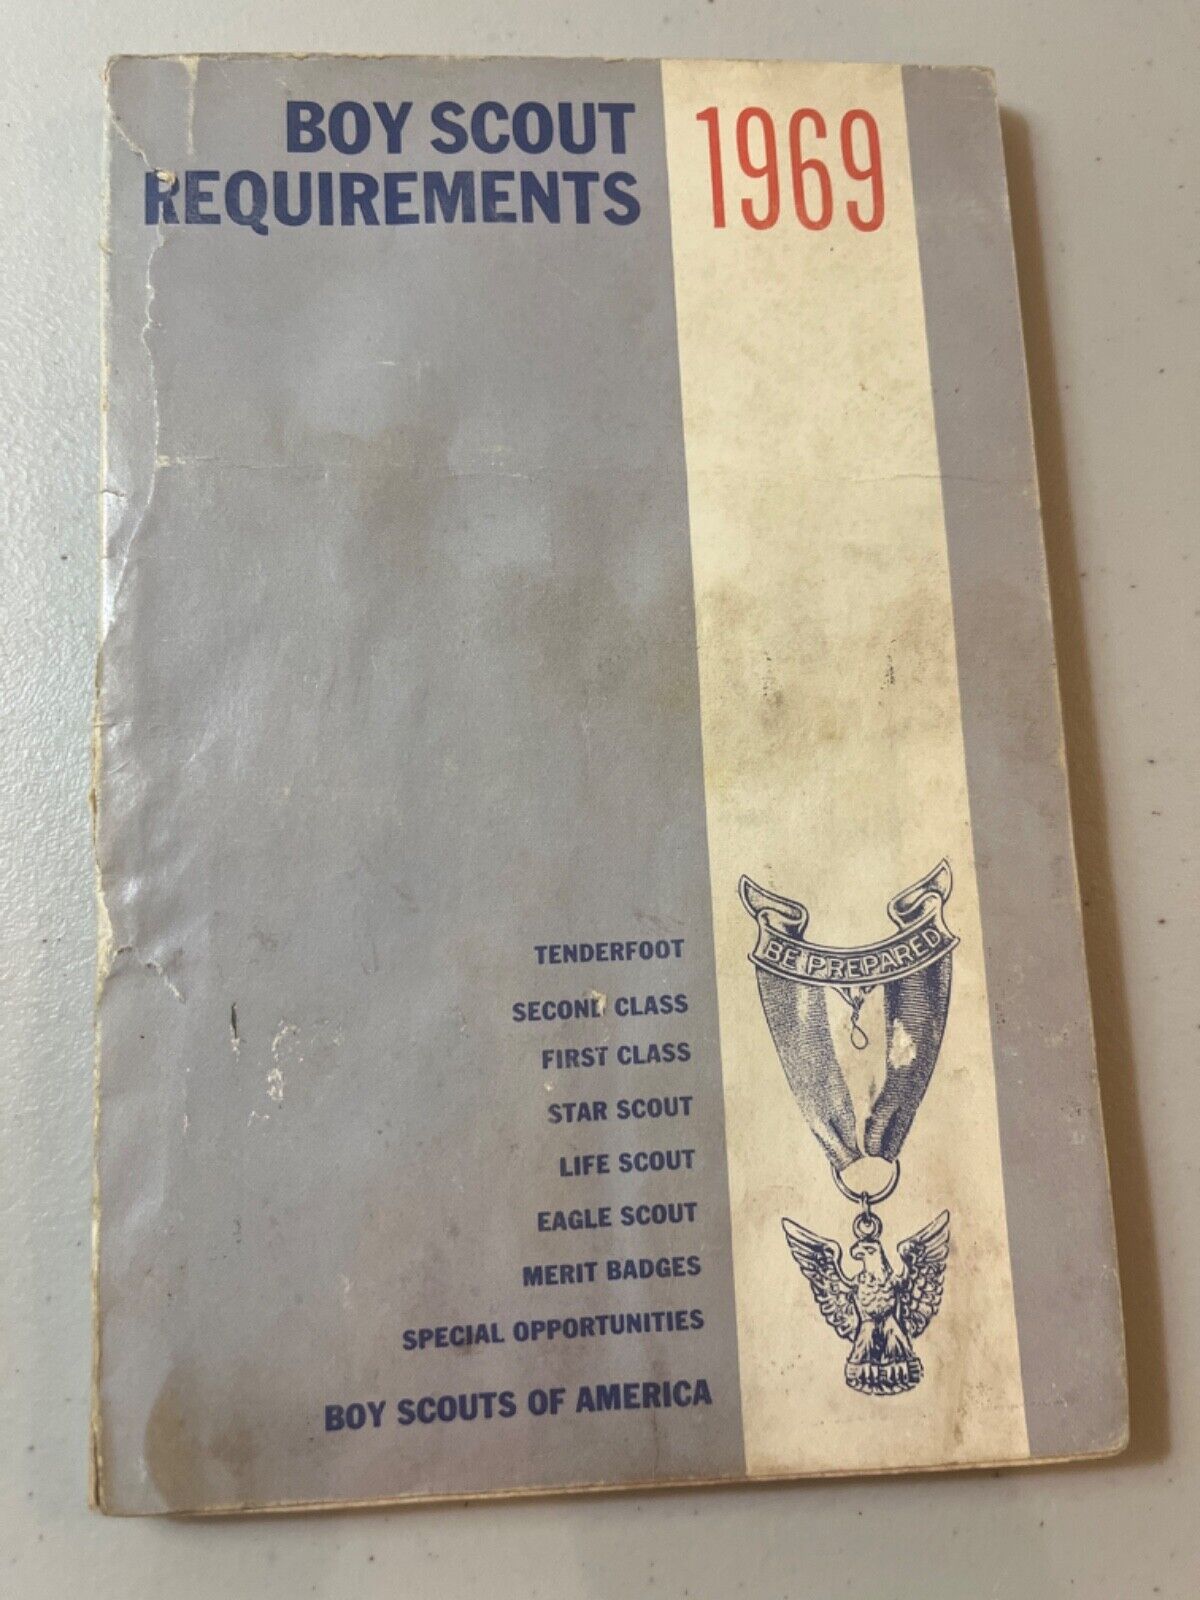 1969 Boy Scout Requirements Vintage Boy Scouts of America BSA Book